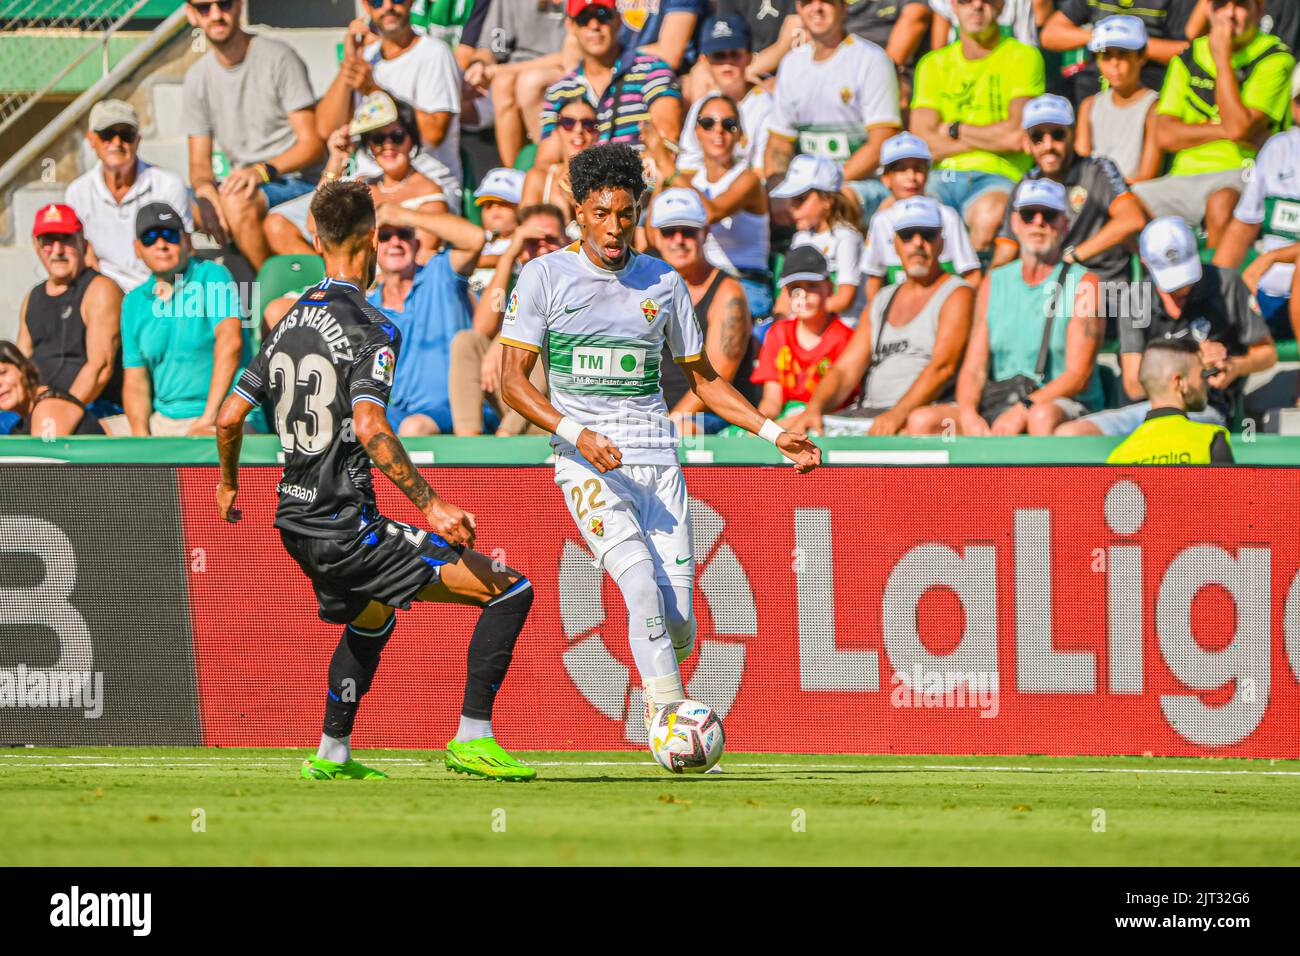 ELCHE, SPAIN - AUGUST 27: Johan Mojica of Elche CF and Brais Mendez of Real Sociedad during the match between Elche CF and Real Sociedad de Futbol of La Liga Santander on August 27, 2022 at Martínez Valero in Elche, Spain. (Photo by Samuel Carreño/ PX Images) Stock Photo